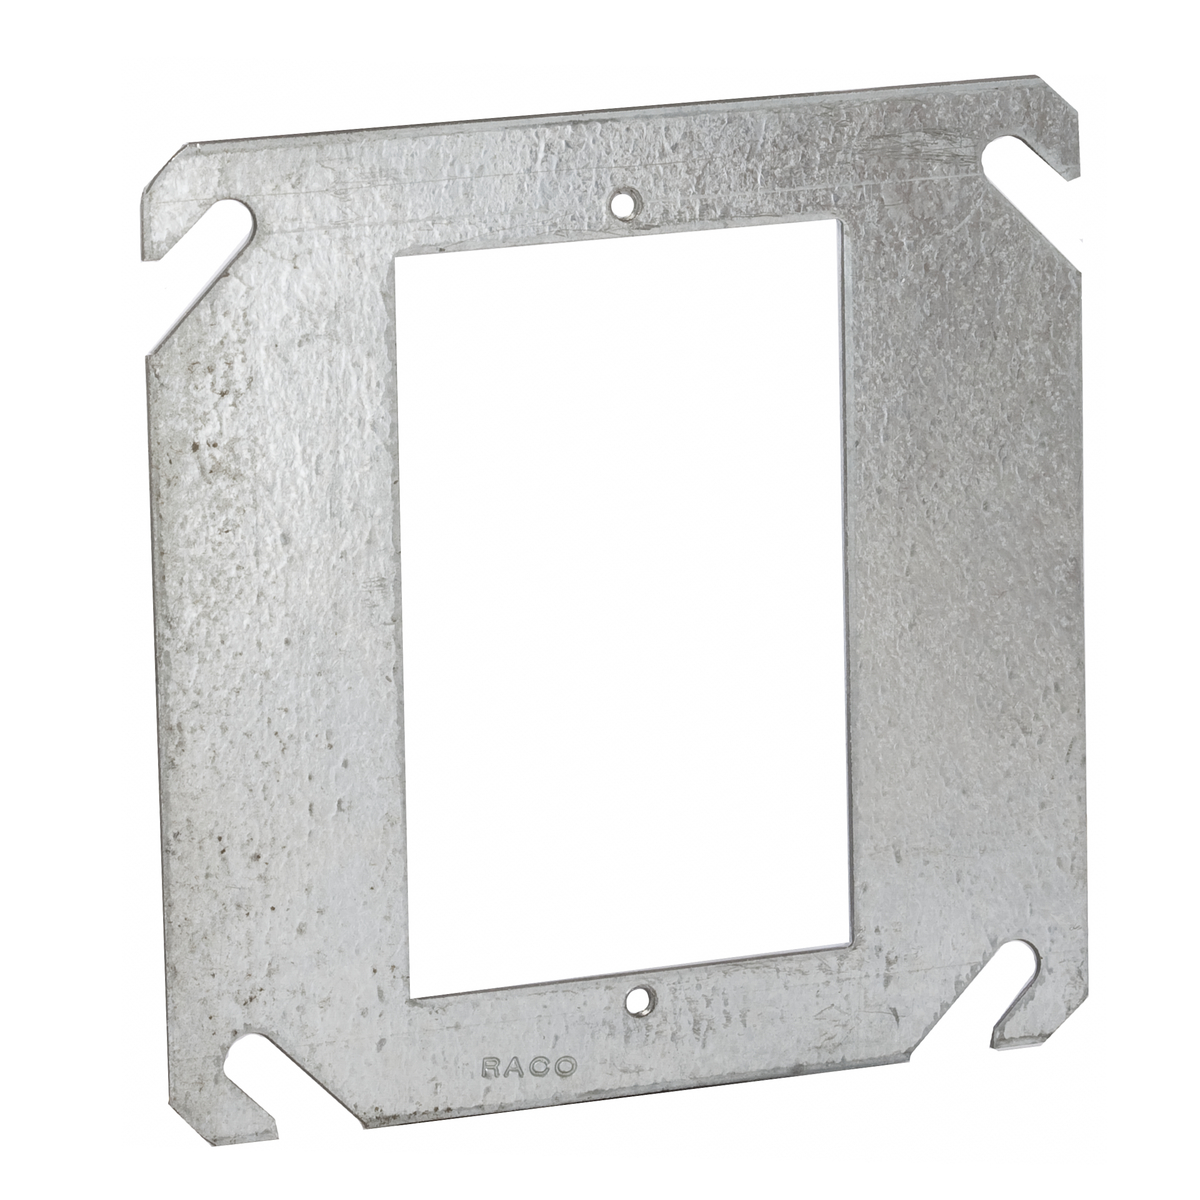 RACO 787 4" SQUARE SINGLE DEVICE FLAT COVER